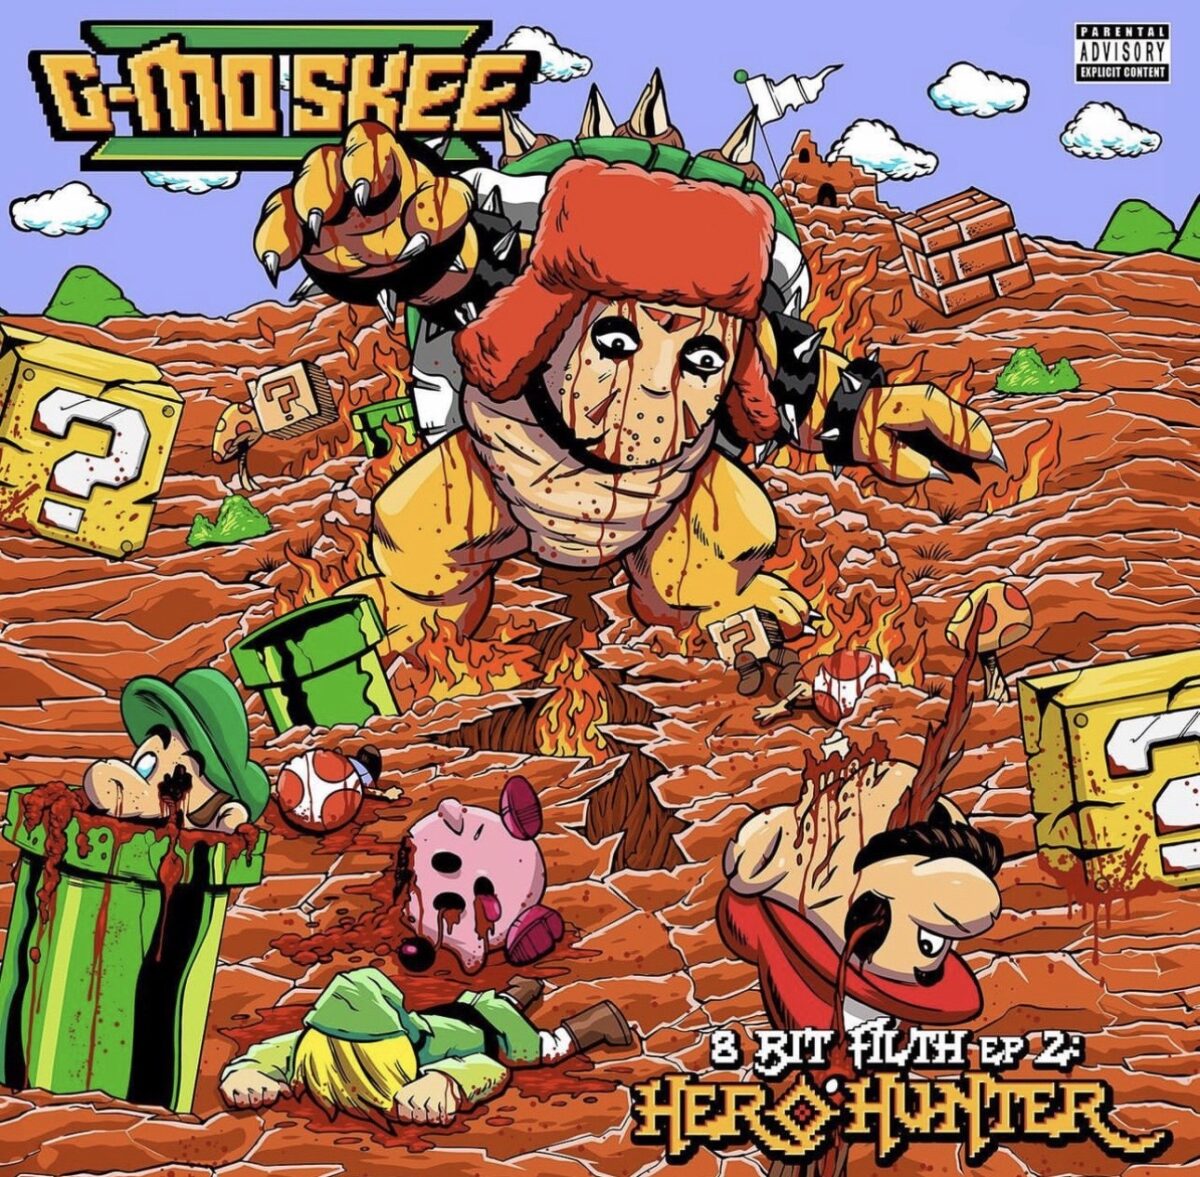 G-Mo Skee Rips It Over Video Game Samples Again for “8 Bit Filth 2